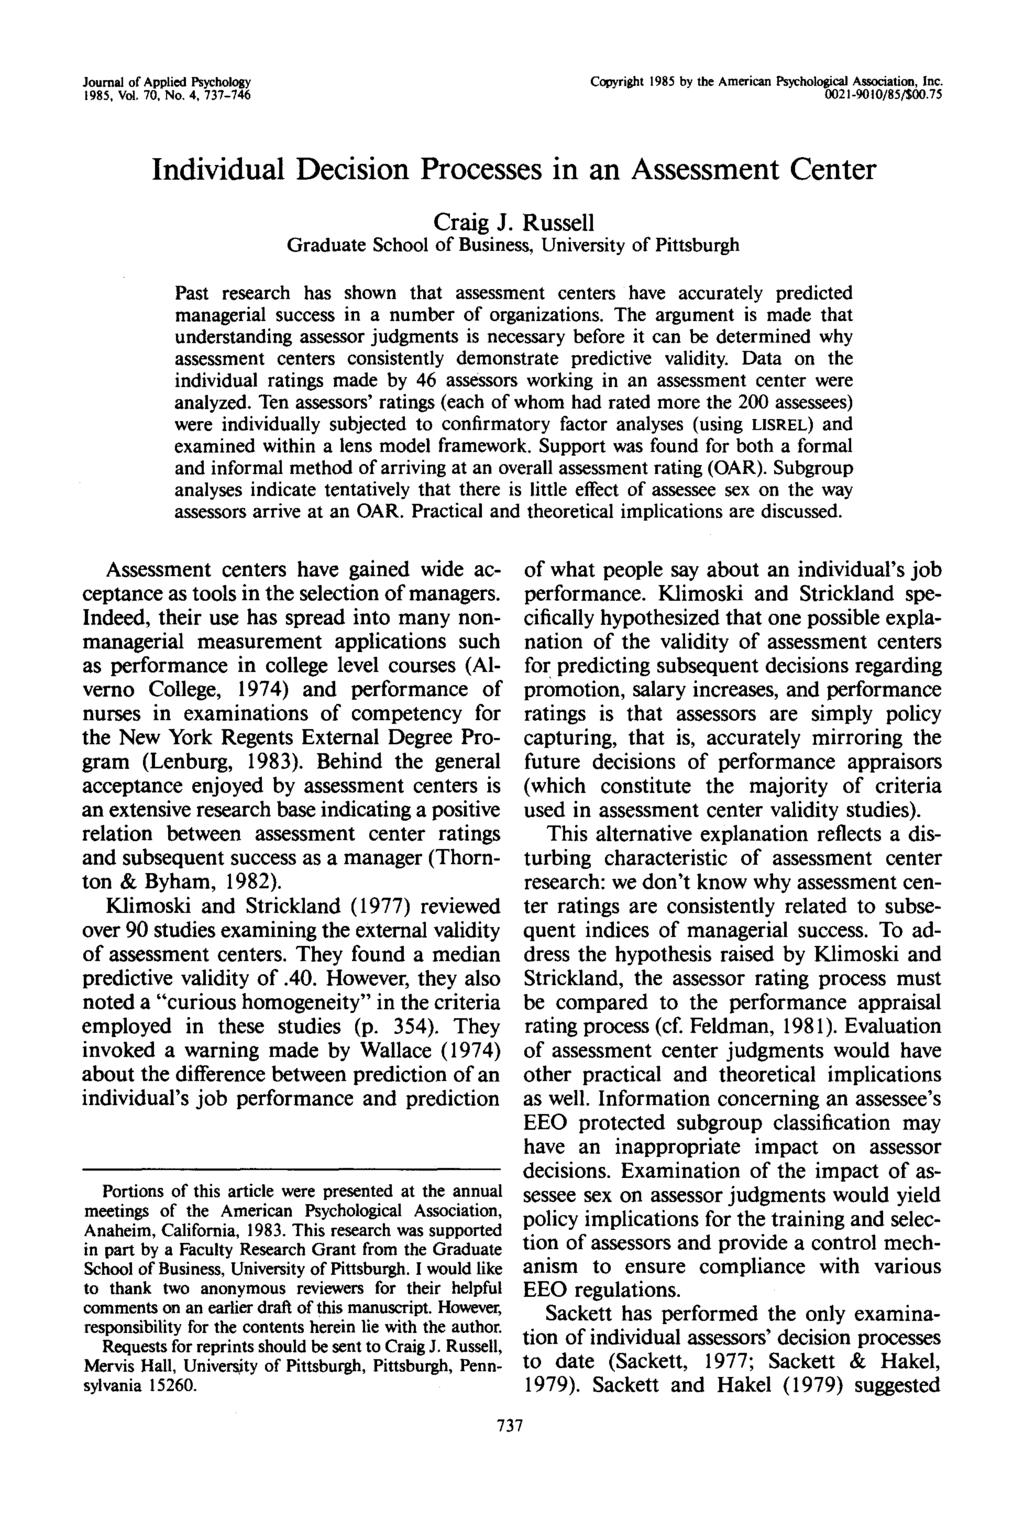 Journal of Applied Psychology 1985, Vol. 70, No. 4, 737-746 Copyright 1985 by the American Psychological Association, Inc. 0021-9010/85/$00.